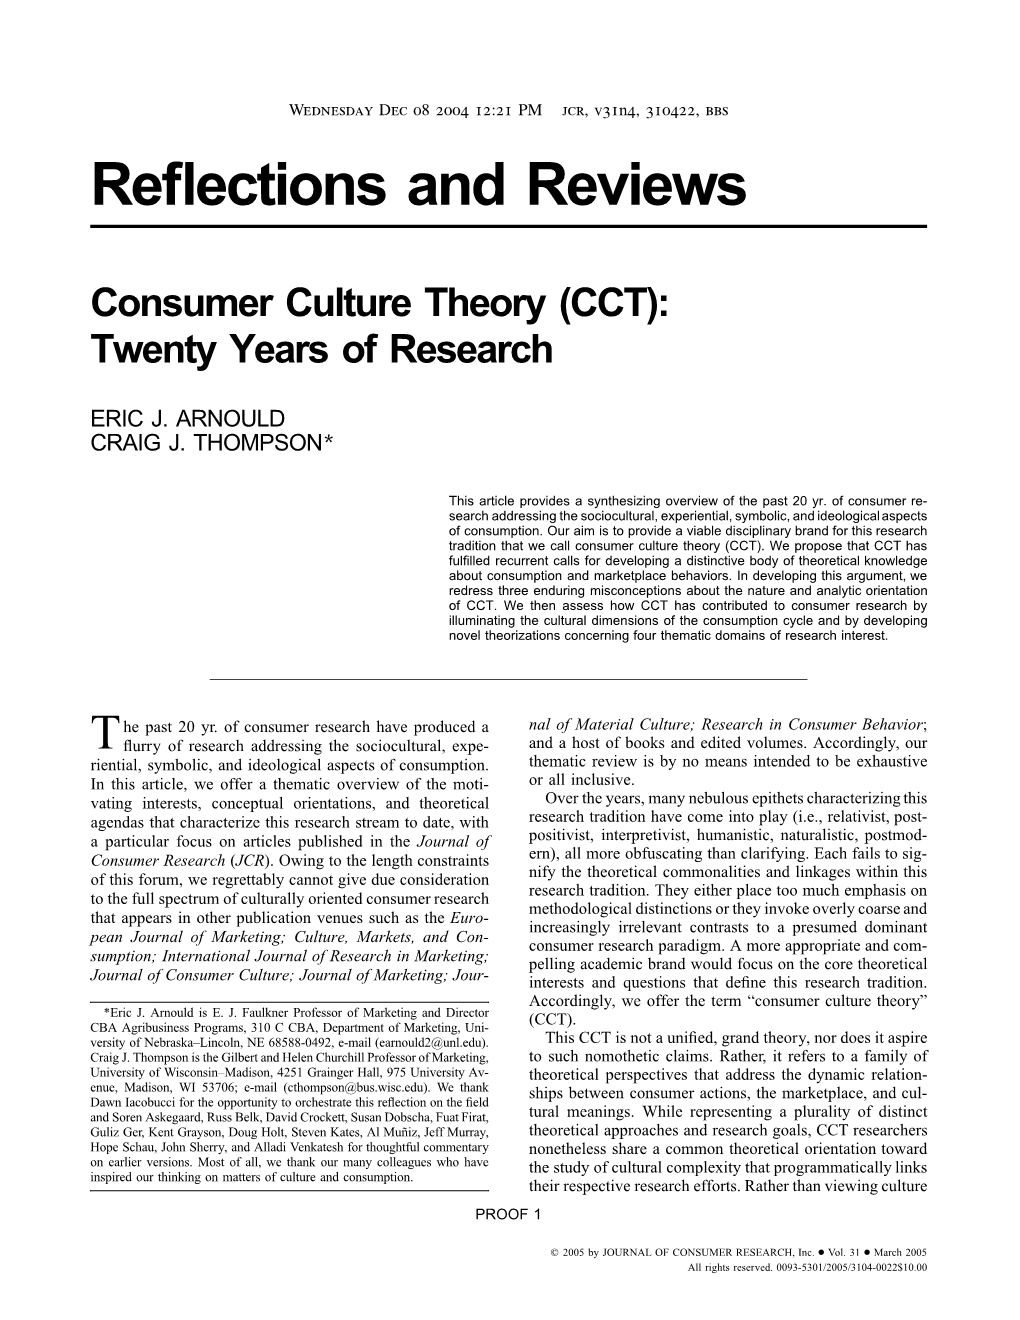 Consumer Culture Theory (CCT): Twenty Years of Research